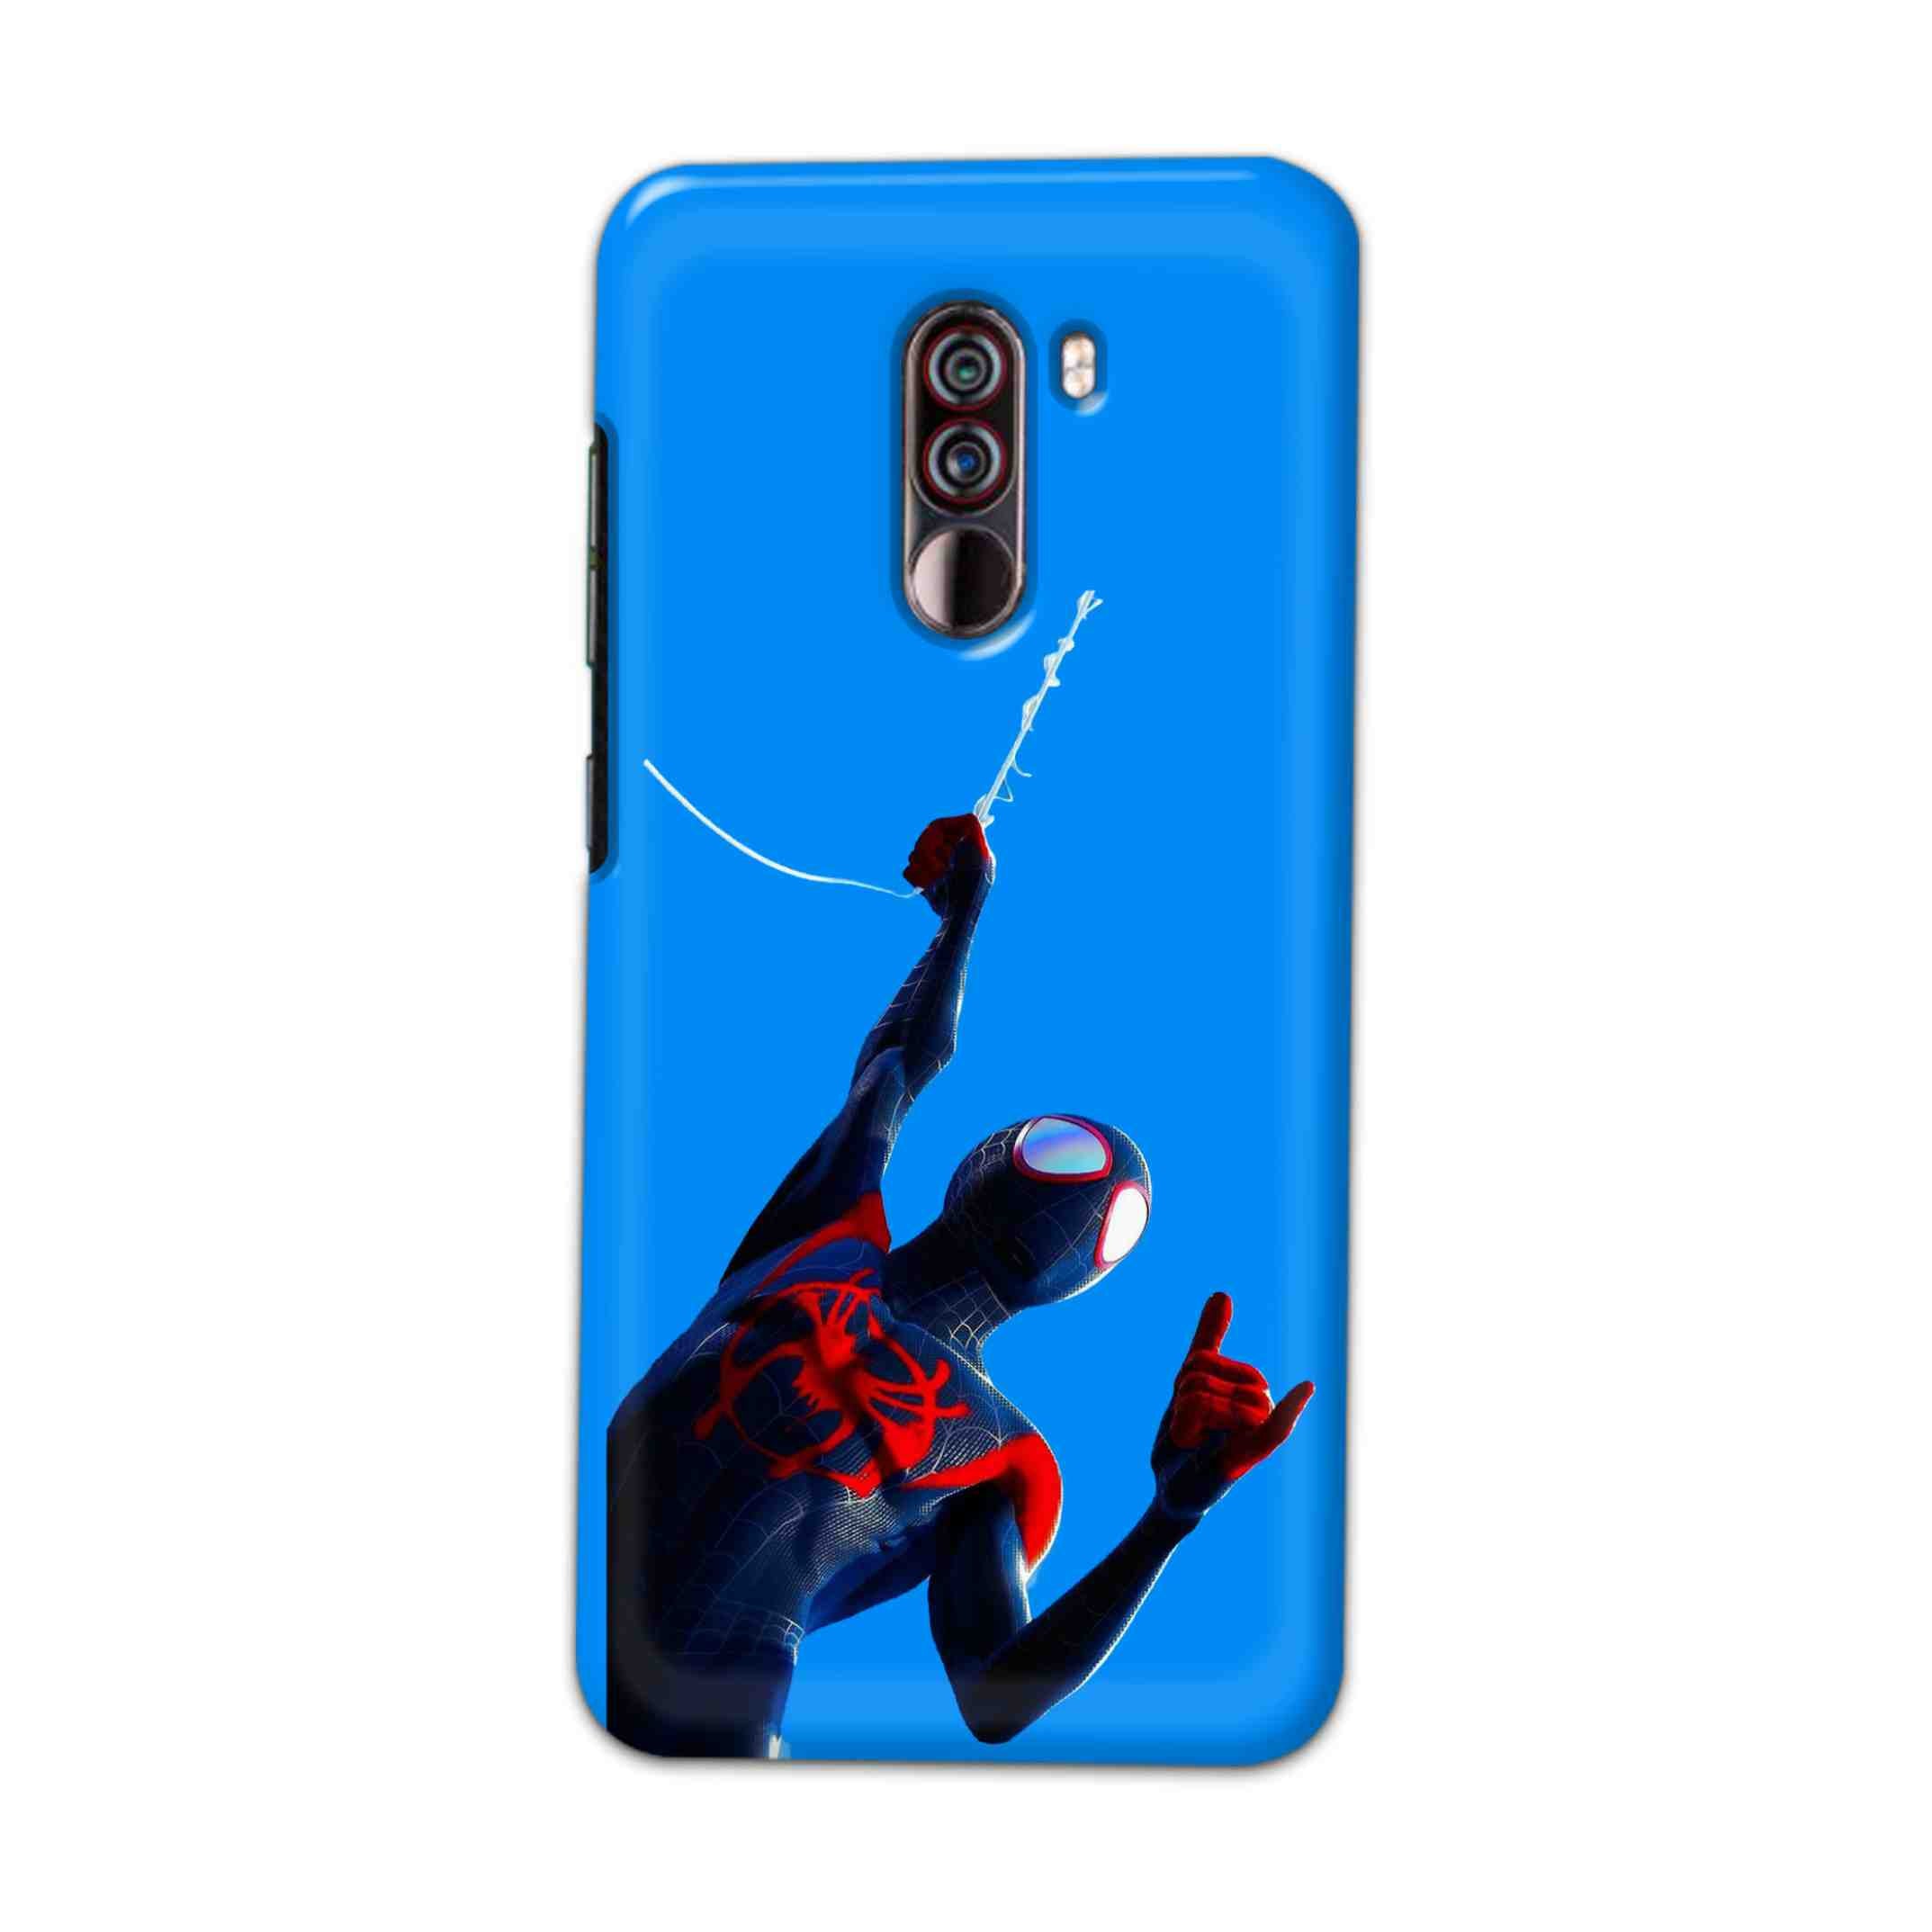 Buy Miles Morales Spiderman Hard Back Mobile Phone Case Cover For Xiaomi Pocophone F1 Online